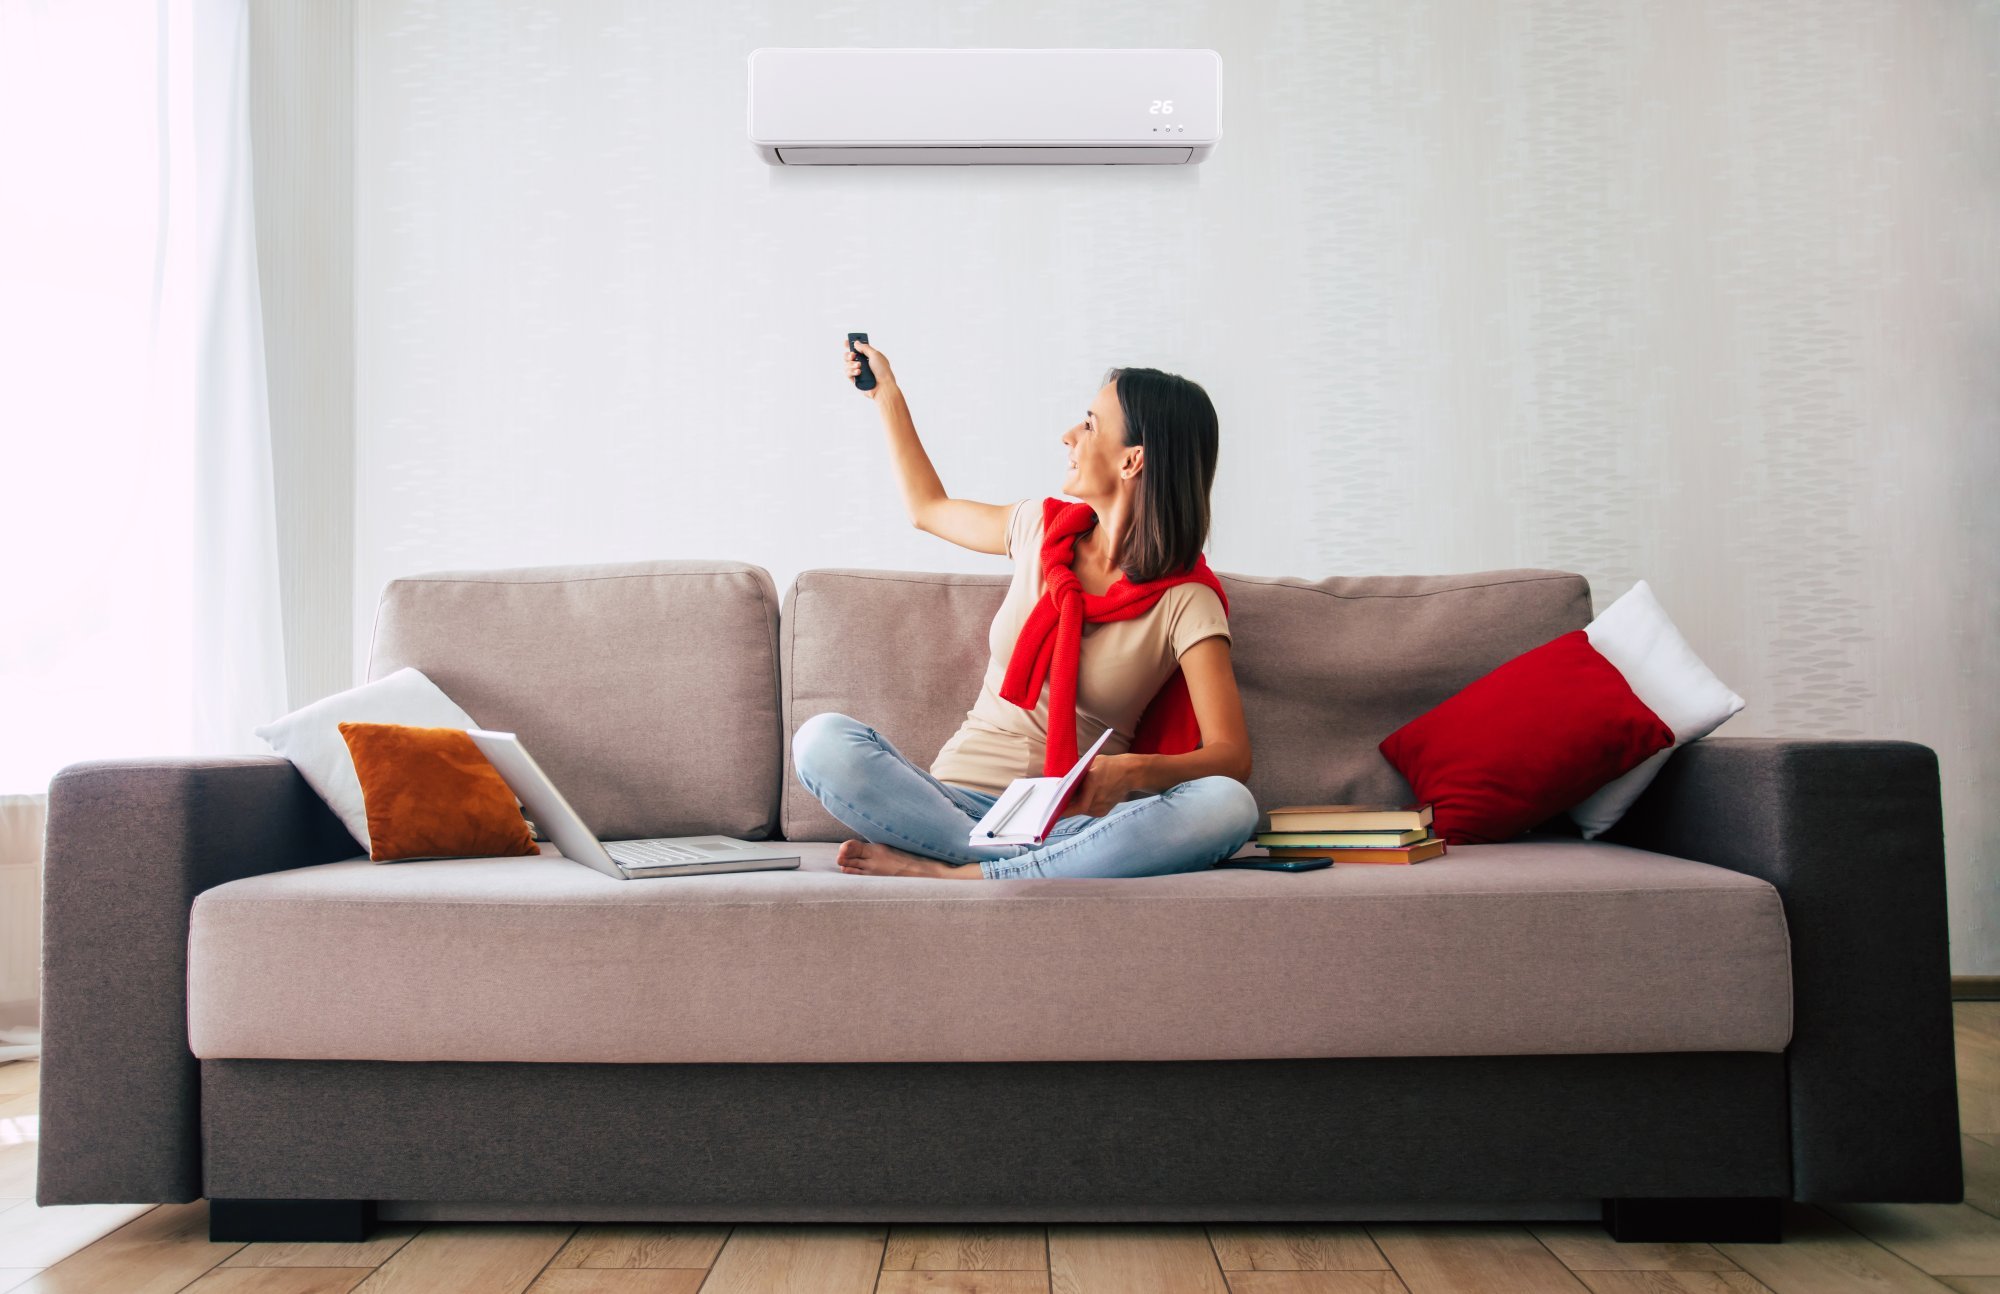 beautiful-modern-brunette-woman-is-using-air-conditioner-while-sitting-couch-resting-hot-day.jpg